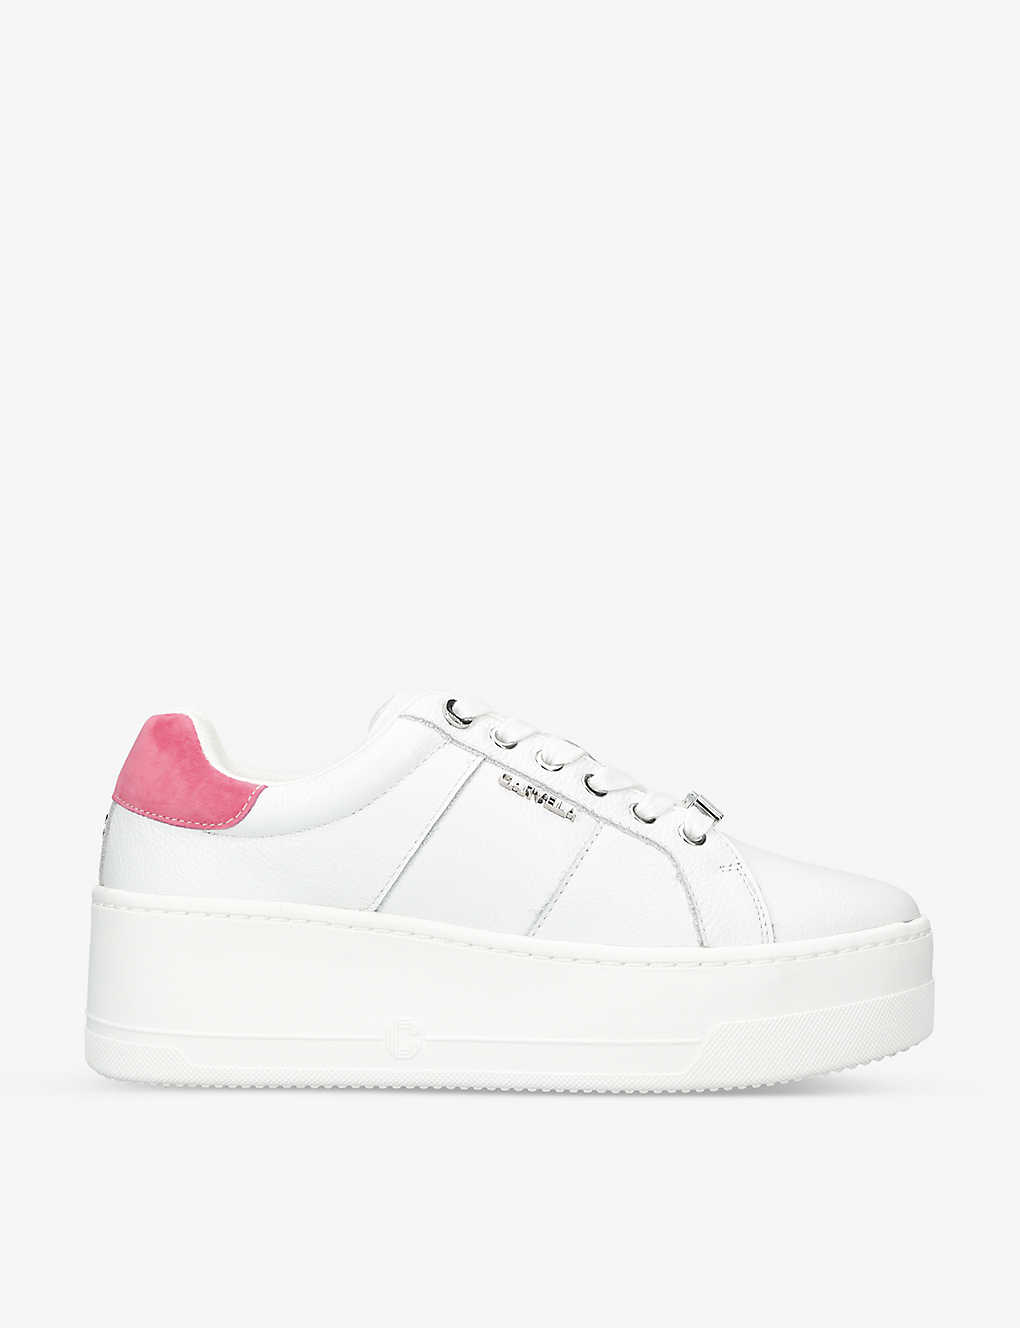 Carvela Connected Leather Flatform Trainers In White/comb